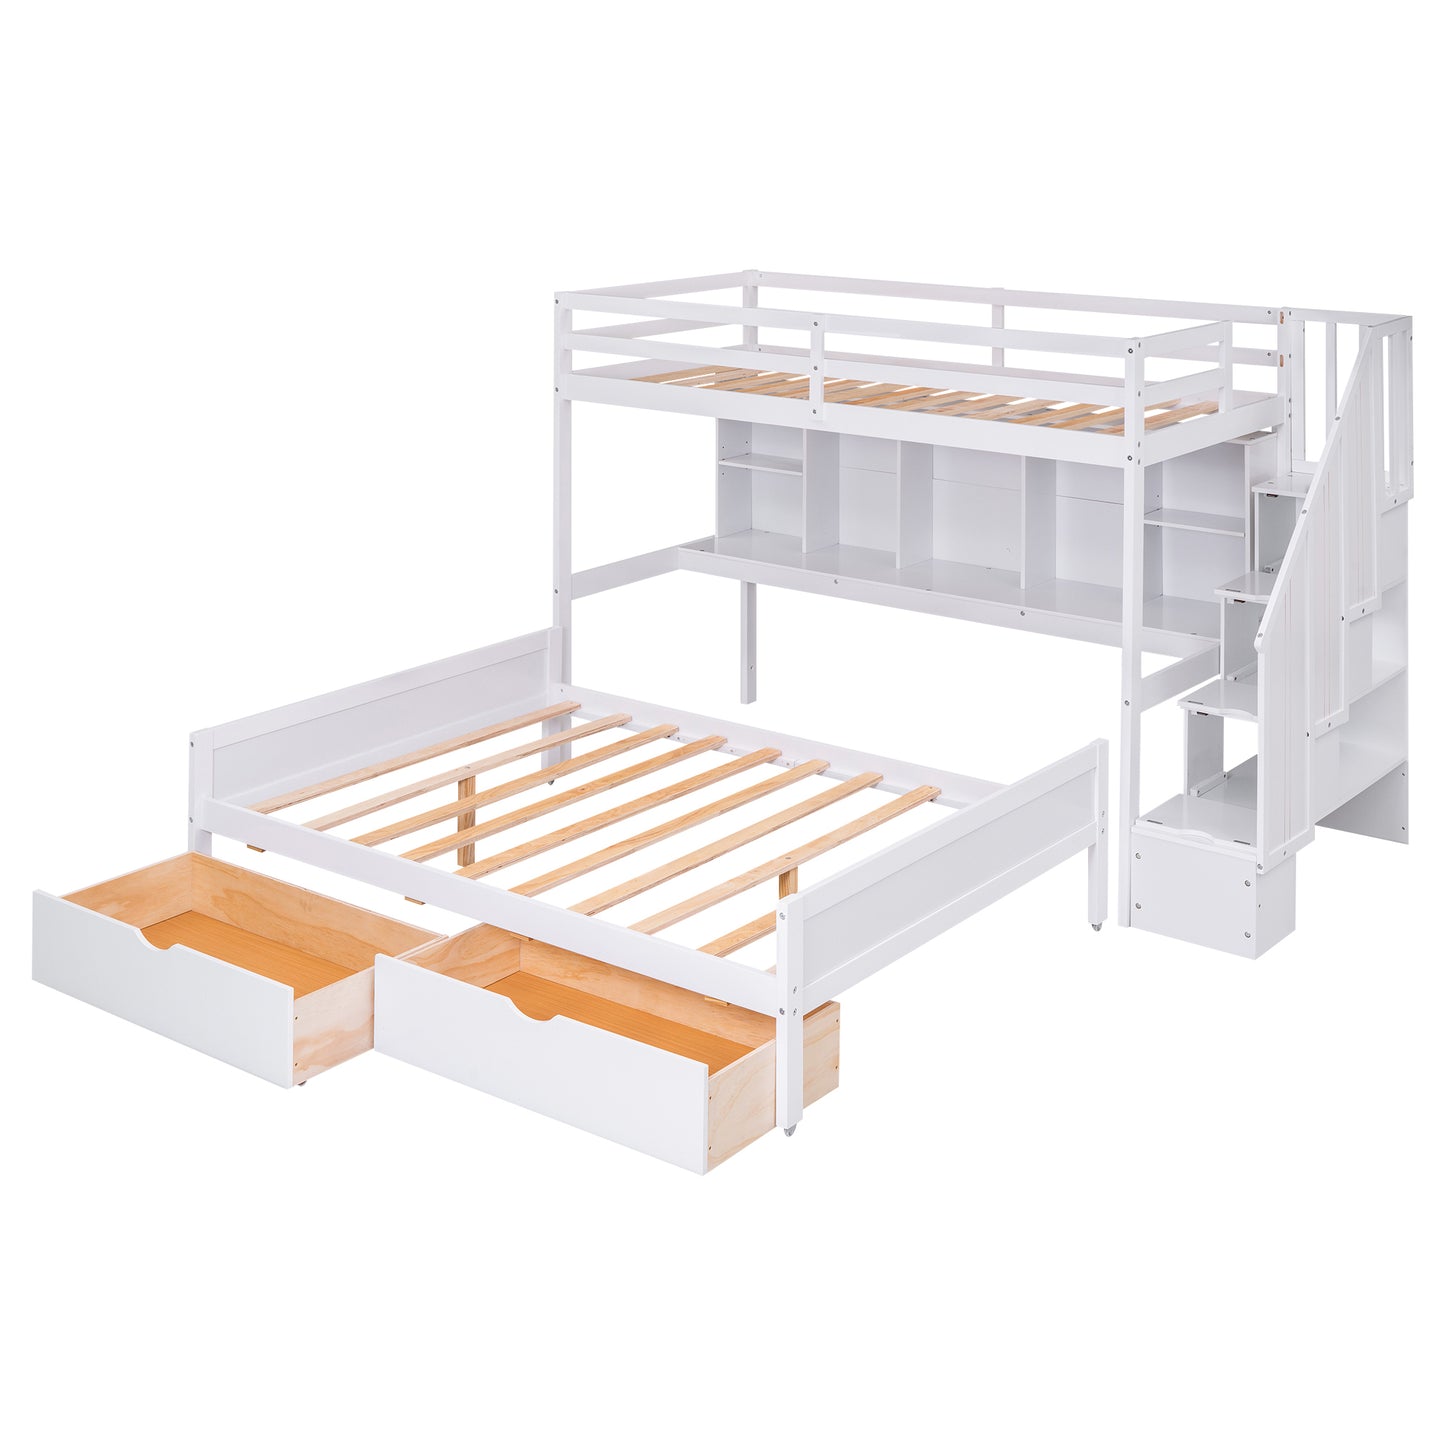 Twin XL over Full Bunk Bed with Built-in Storage Shelves, Drawers and Staircase,White